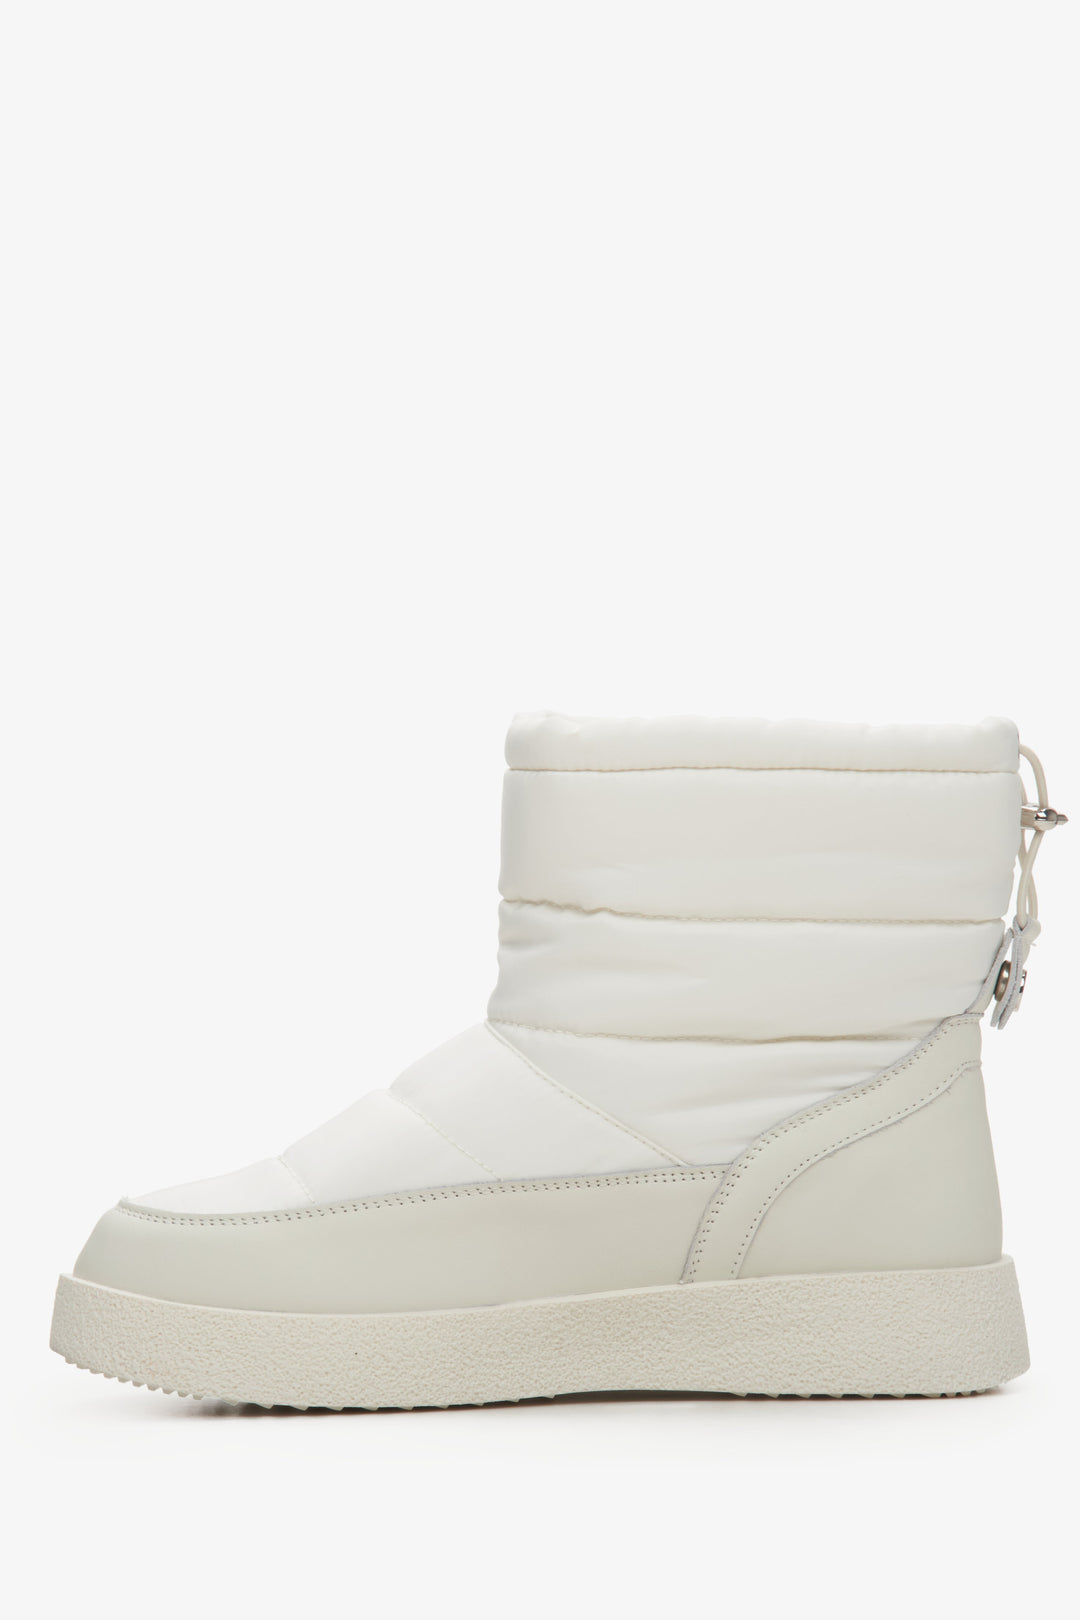 Women's leather, light beige snow boots by Estro - side view of the shoe.